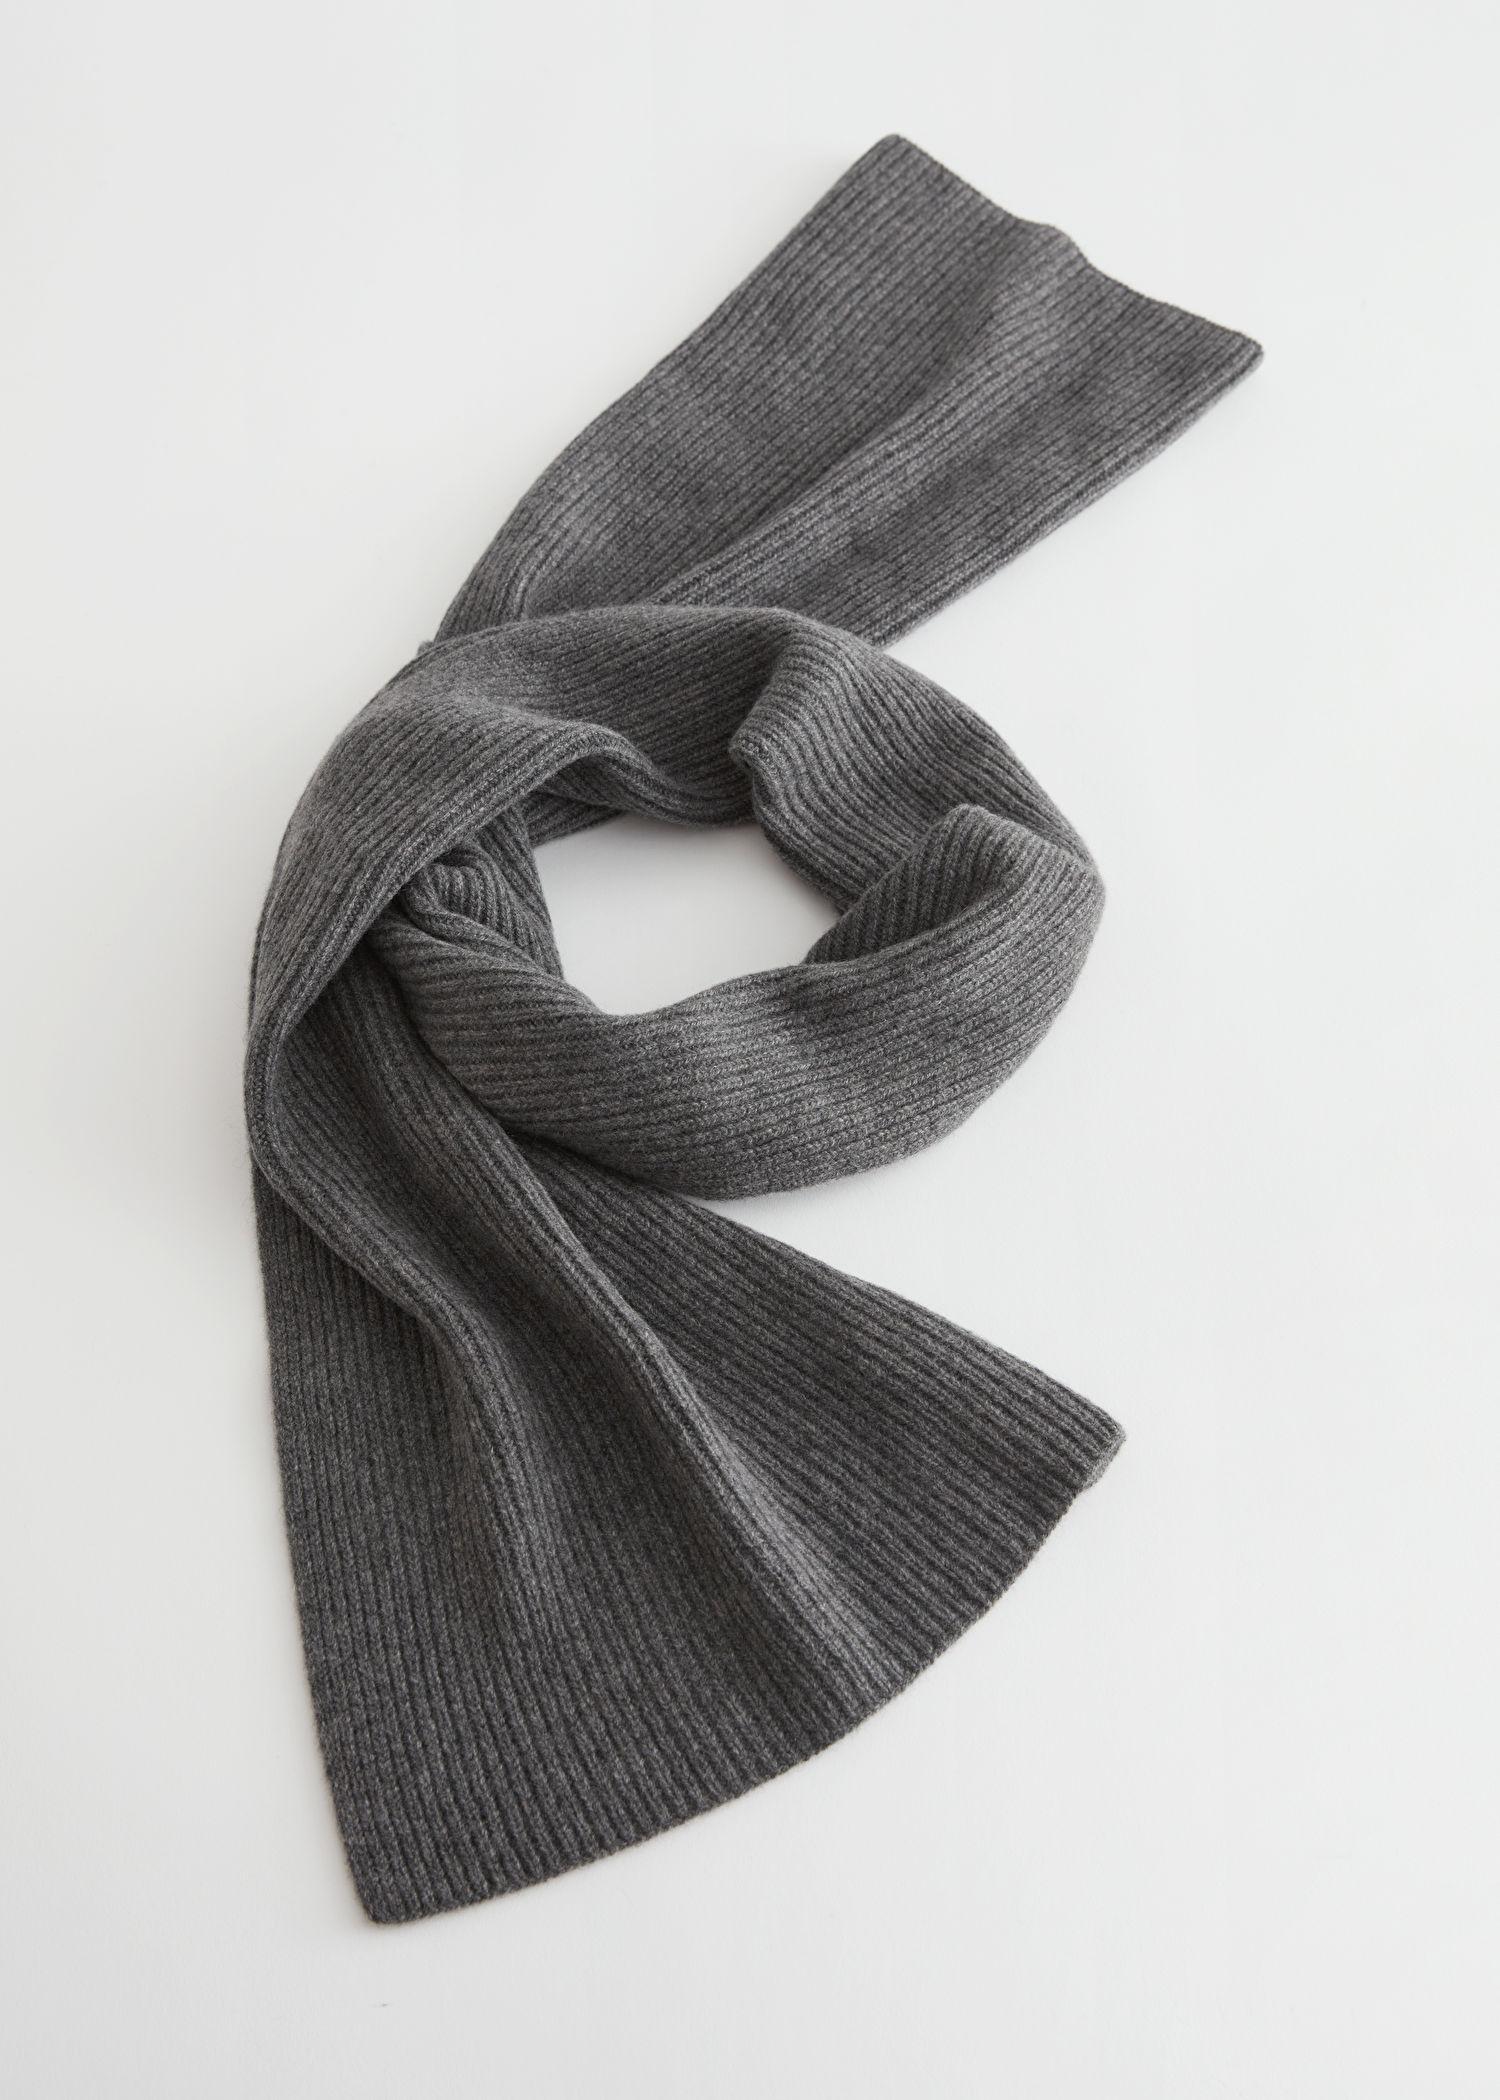 & Other Stories Cashmere Ribbed Knit Scarf in Grey | Lyst Canada